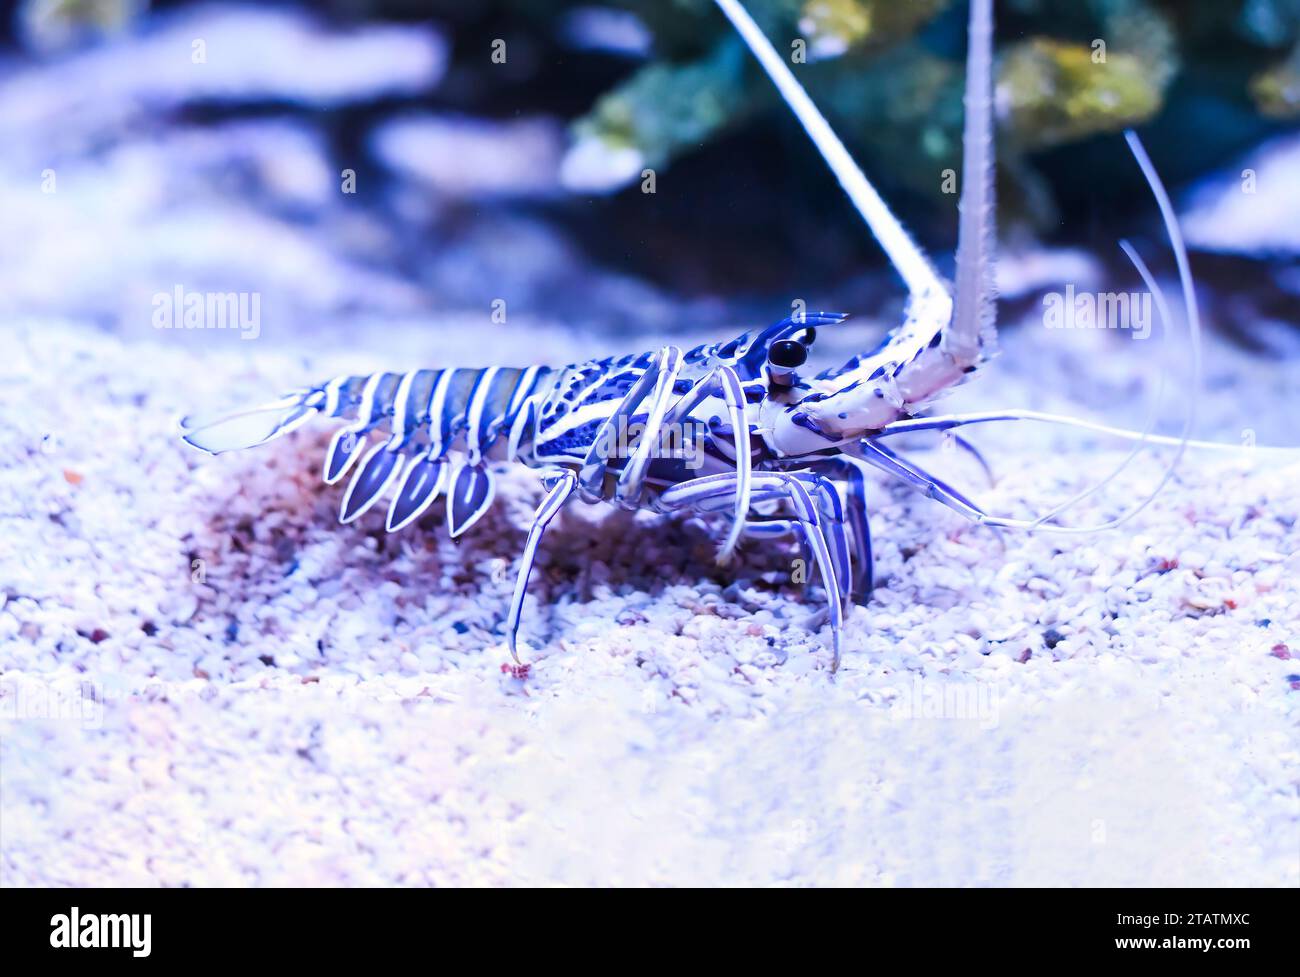 Panulirus versicolor also named as painted lobster, common rock lobster, bamboo lobster and blue spiny lobster in aquarium in Thailand Stock Photo